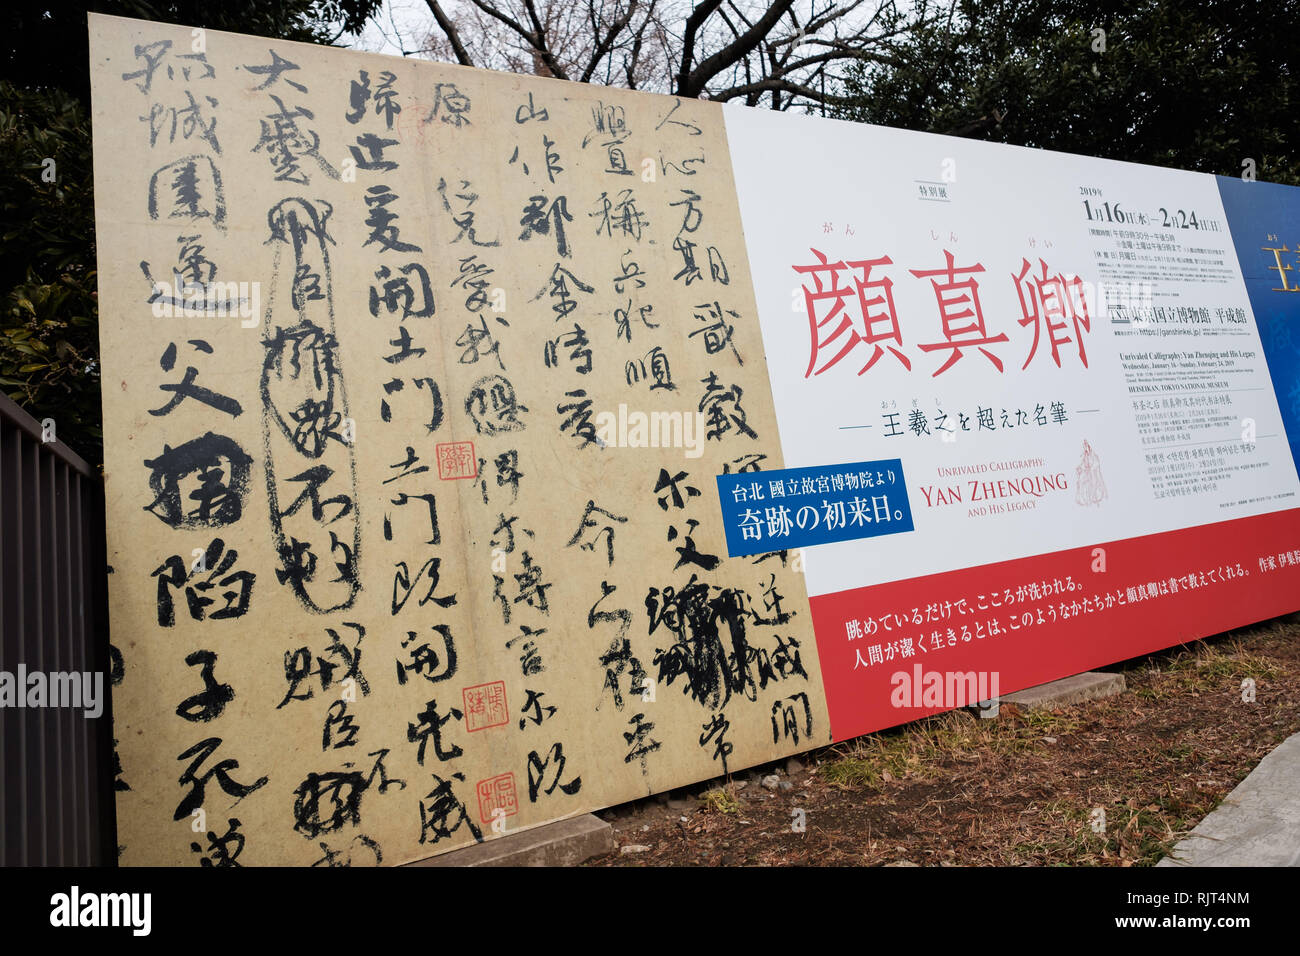 A Large Board Sign For Unrivaled Calligraphy Yan Zhenqing And His Legacy Exhibition Is Displayed In Tokyo On February 08 19 Decision To Lend Calligraphy Masterpiece Made By Yan Zhenqing A Tang